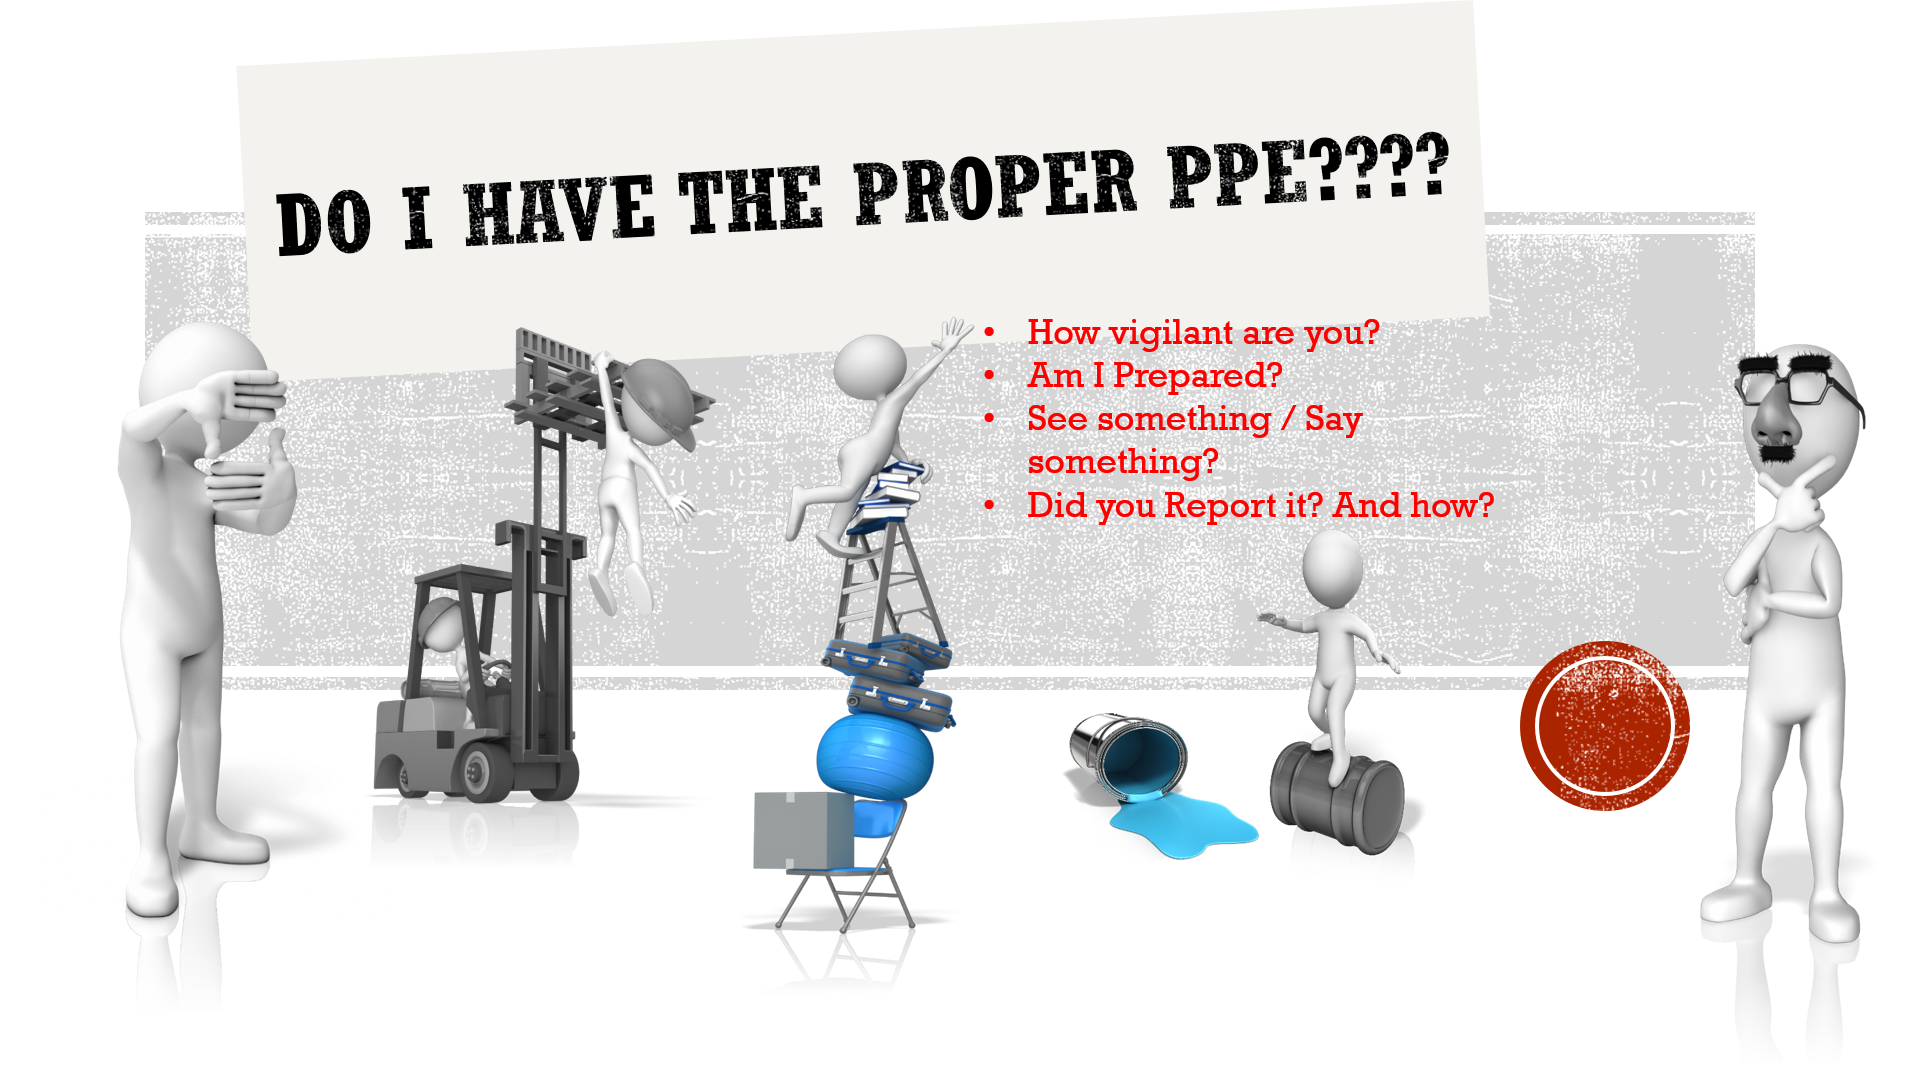 3D figures demonstrate unsafe work practices on a monochrome slide with text questioning proper PPE usage and promoting safety vigilance for a webinar.